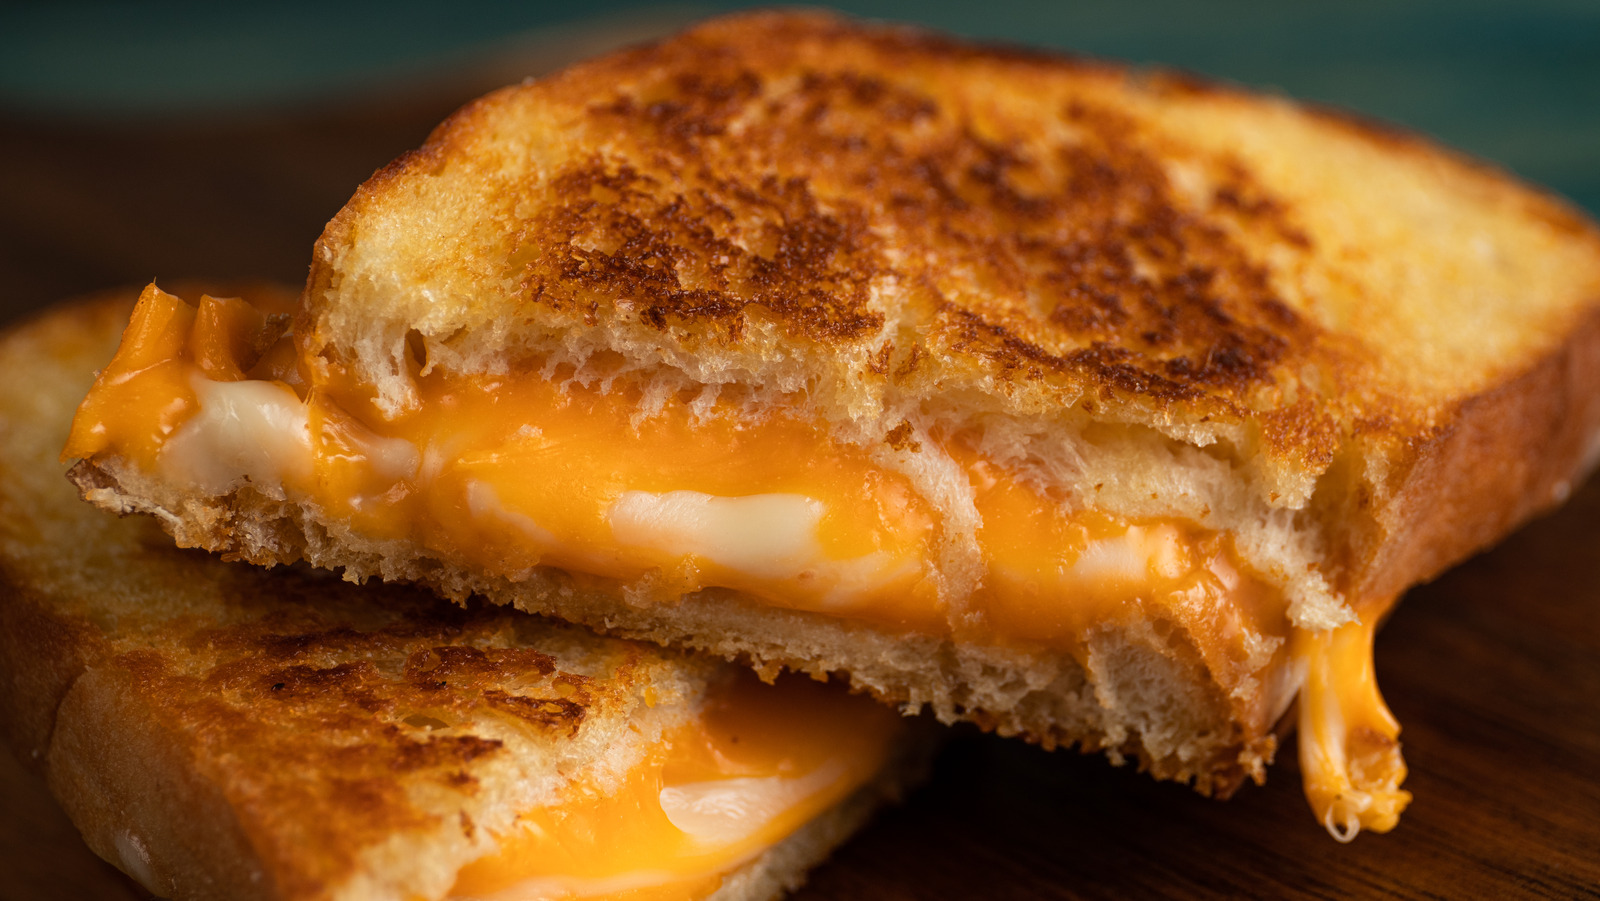 https://www.tastingtable.com/img/gallery/the-best-grilled-cheese-sandwiches-in-the-us-according-to-tasting-table-staff/l-intro-1680117163.jpg